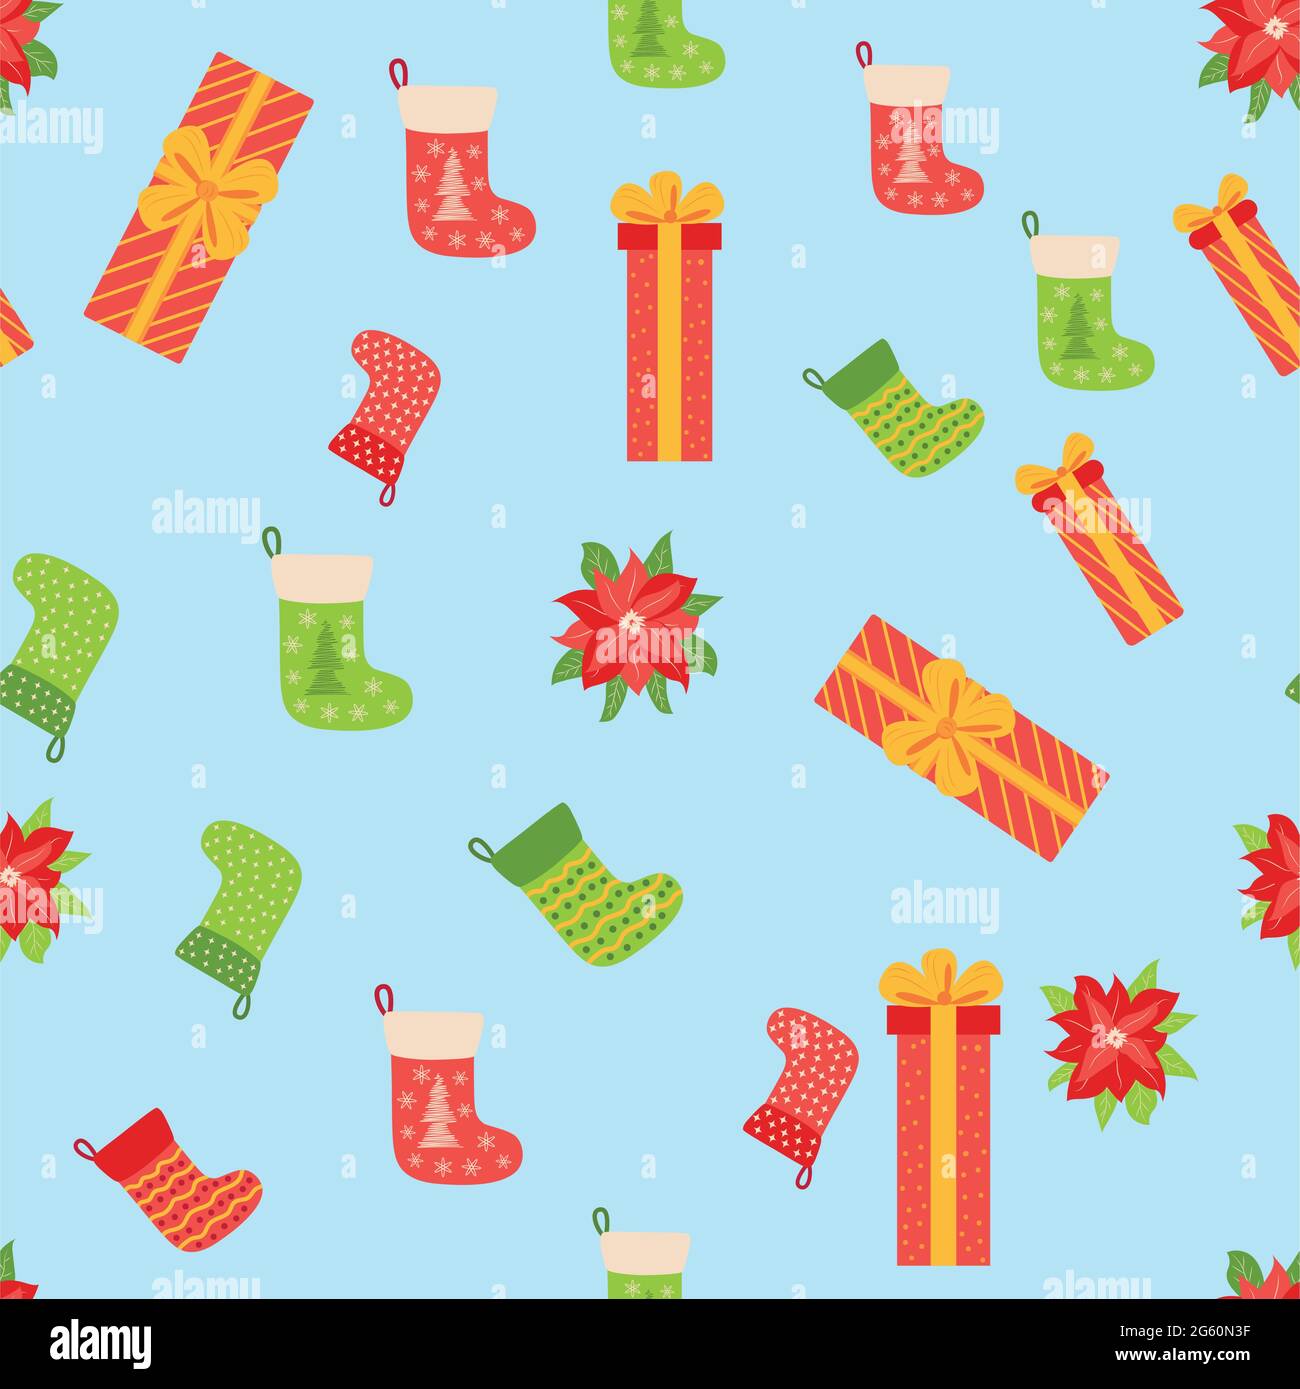 Seamless pattern with Christmas gifts, poinsettia and red, green stocking. Christmas packaging Stock Vector